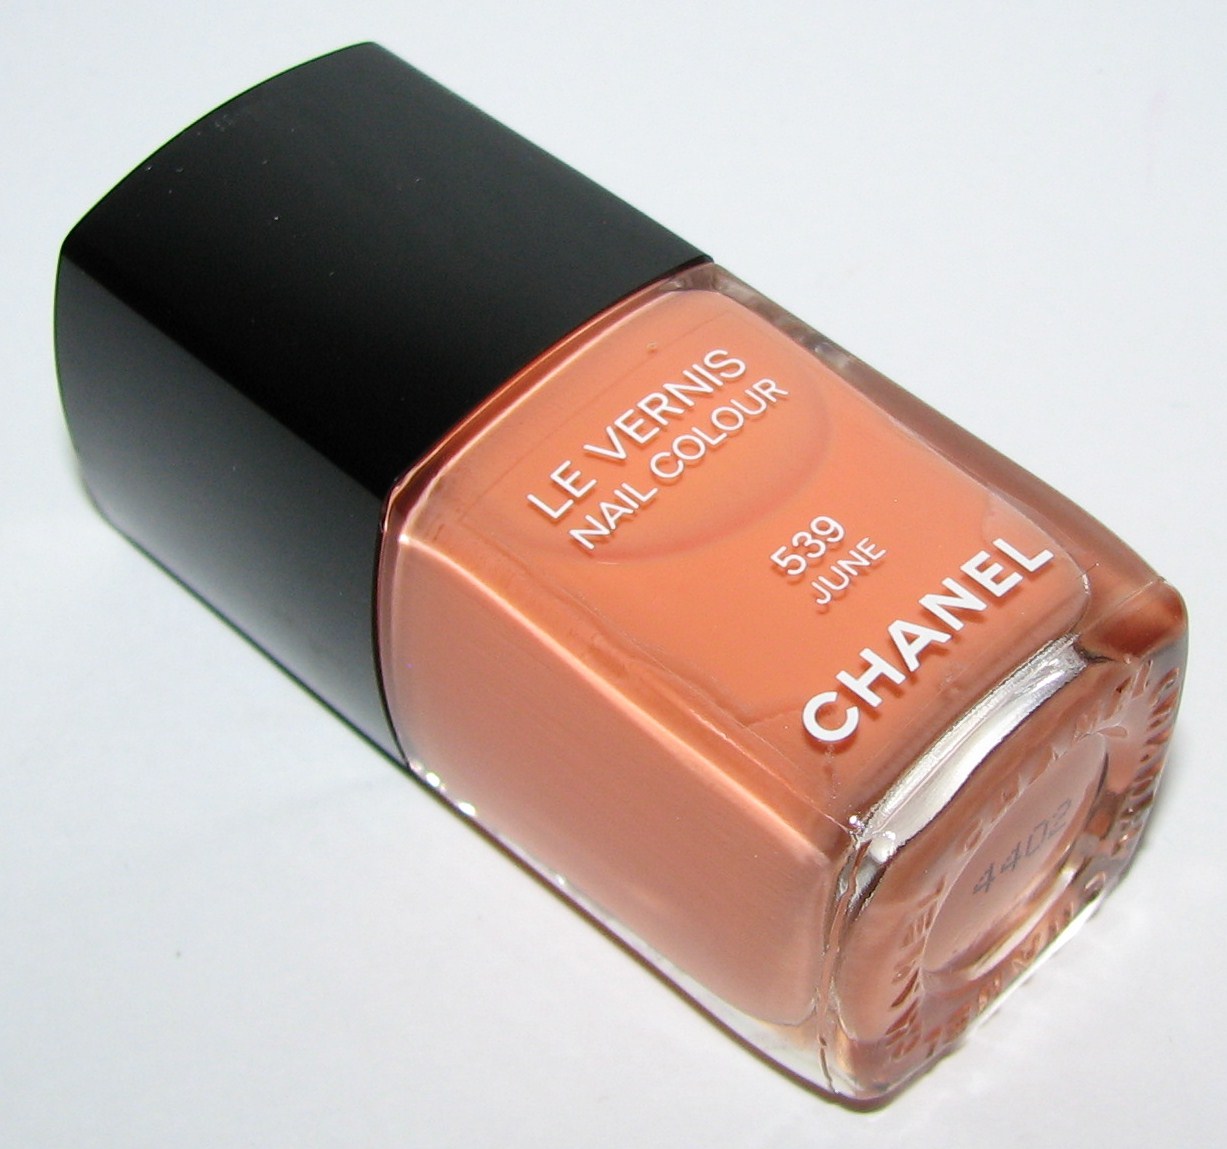 underskud Zoo om natten Pædagogik Chanel JUNE 539 Le Vernis Nail Colour Swatches and Review - Spring 2012 -  Blushing Noir